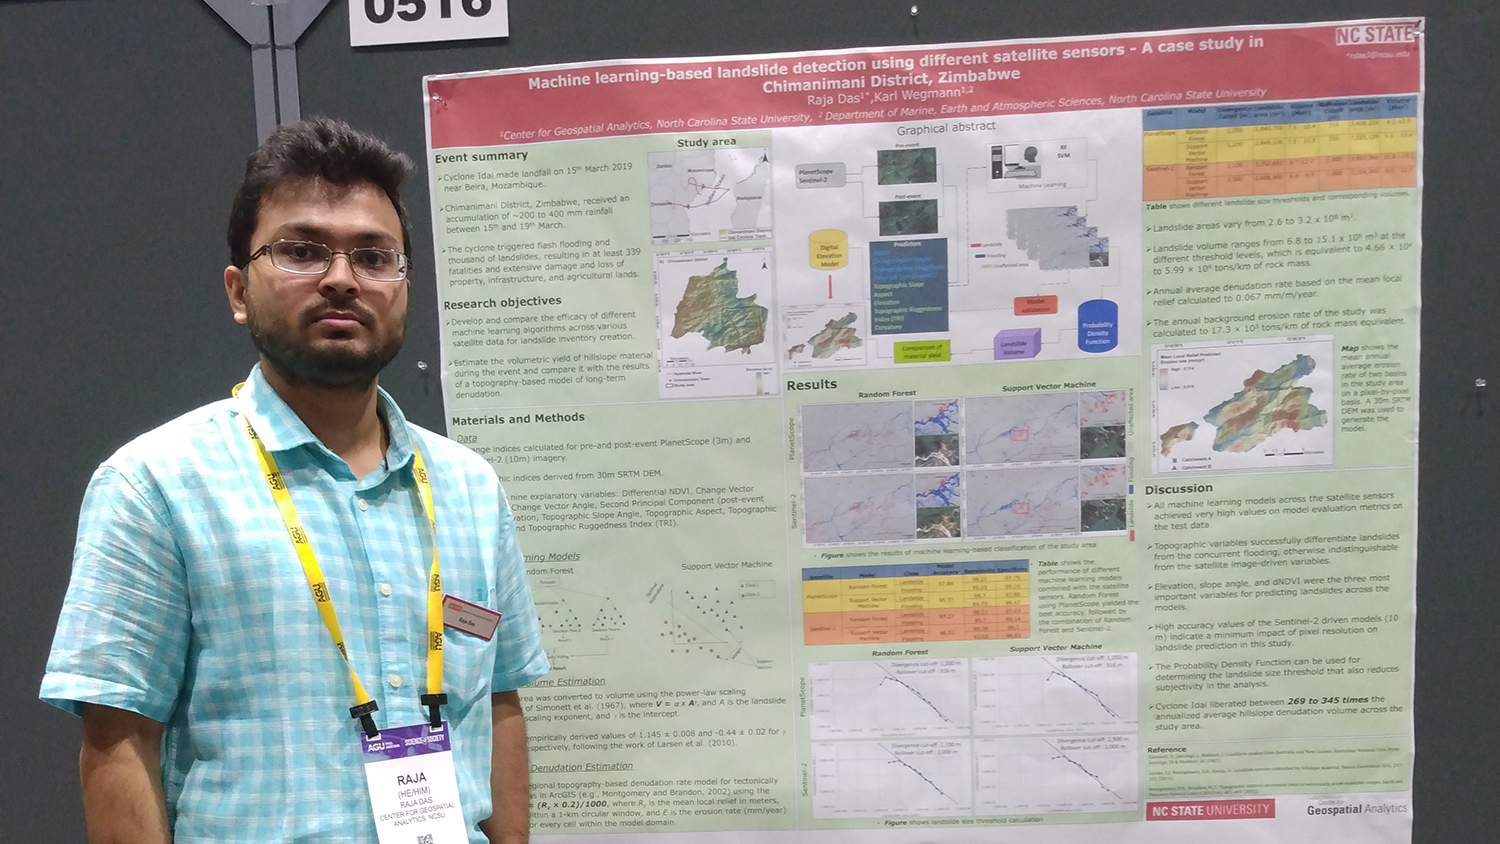 Raja Das stands next to his poster - Observing Landslide Events from Multi-Satellite Sensors - Center for Geospatial Analytics at NC State University